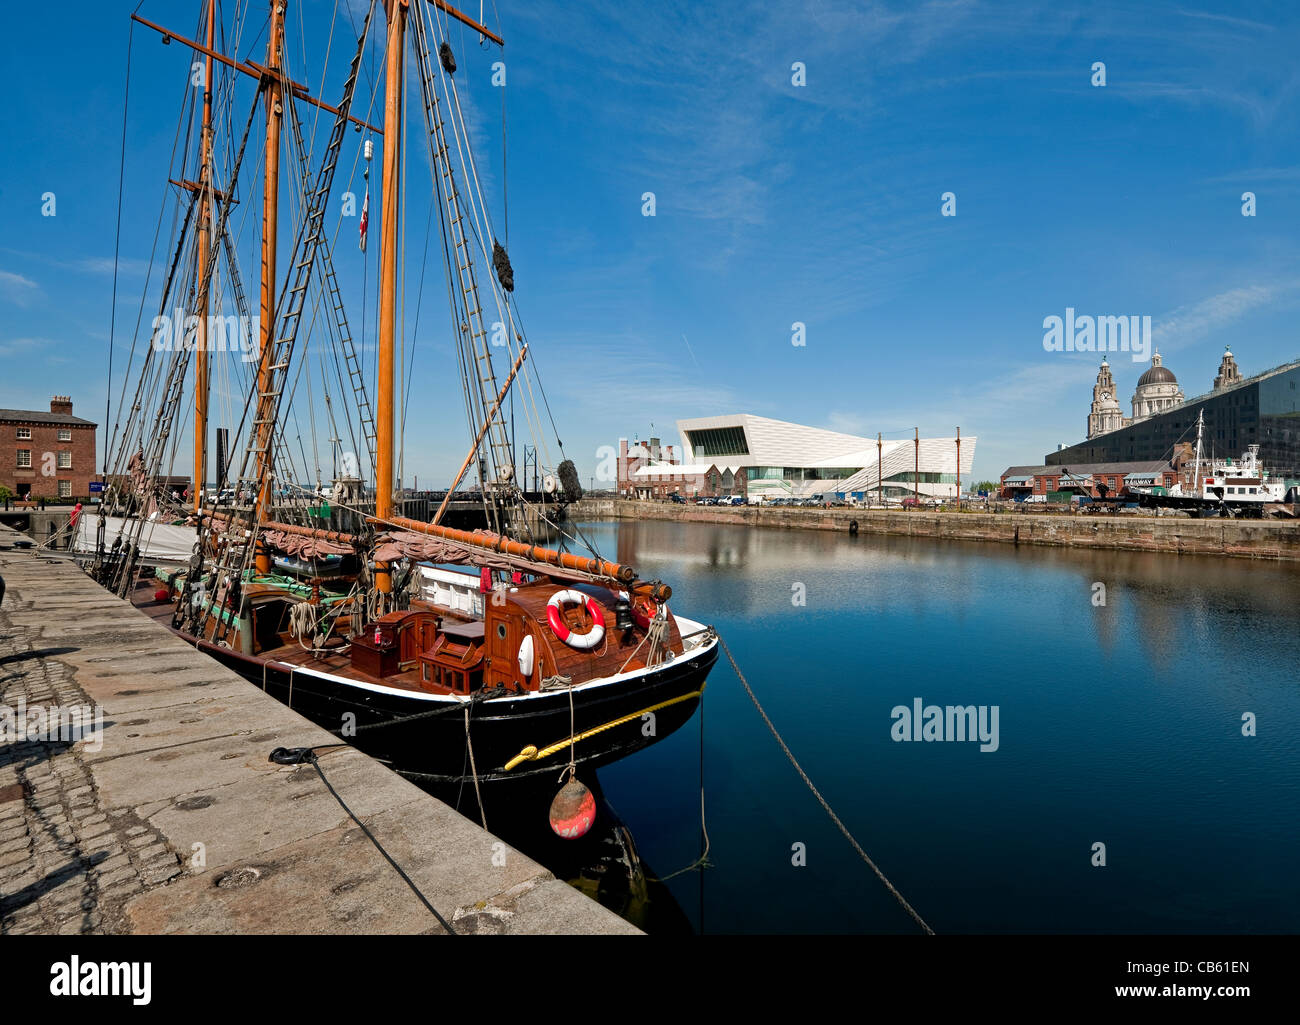 Sailing ship moored in Canning Half Tide dock, Liverpool with New Museum visible in background Stock Photo